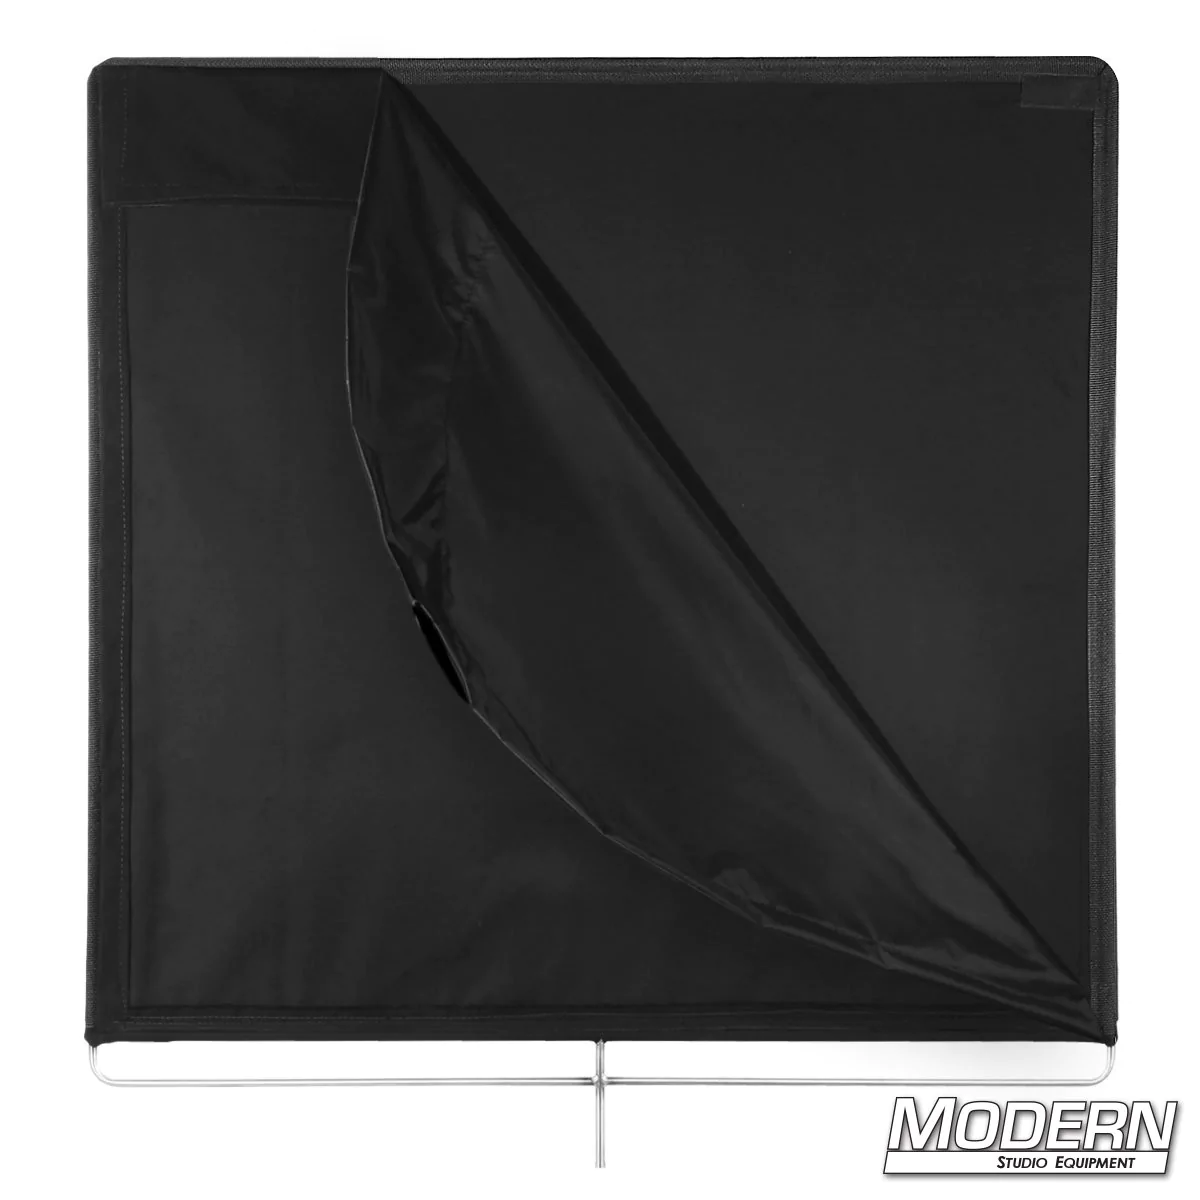 36" x 36" Solid Floppy - Opens to 36" x 72"